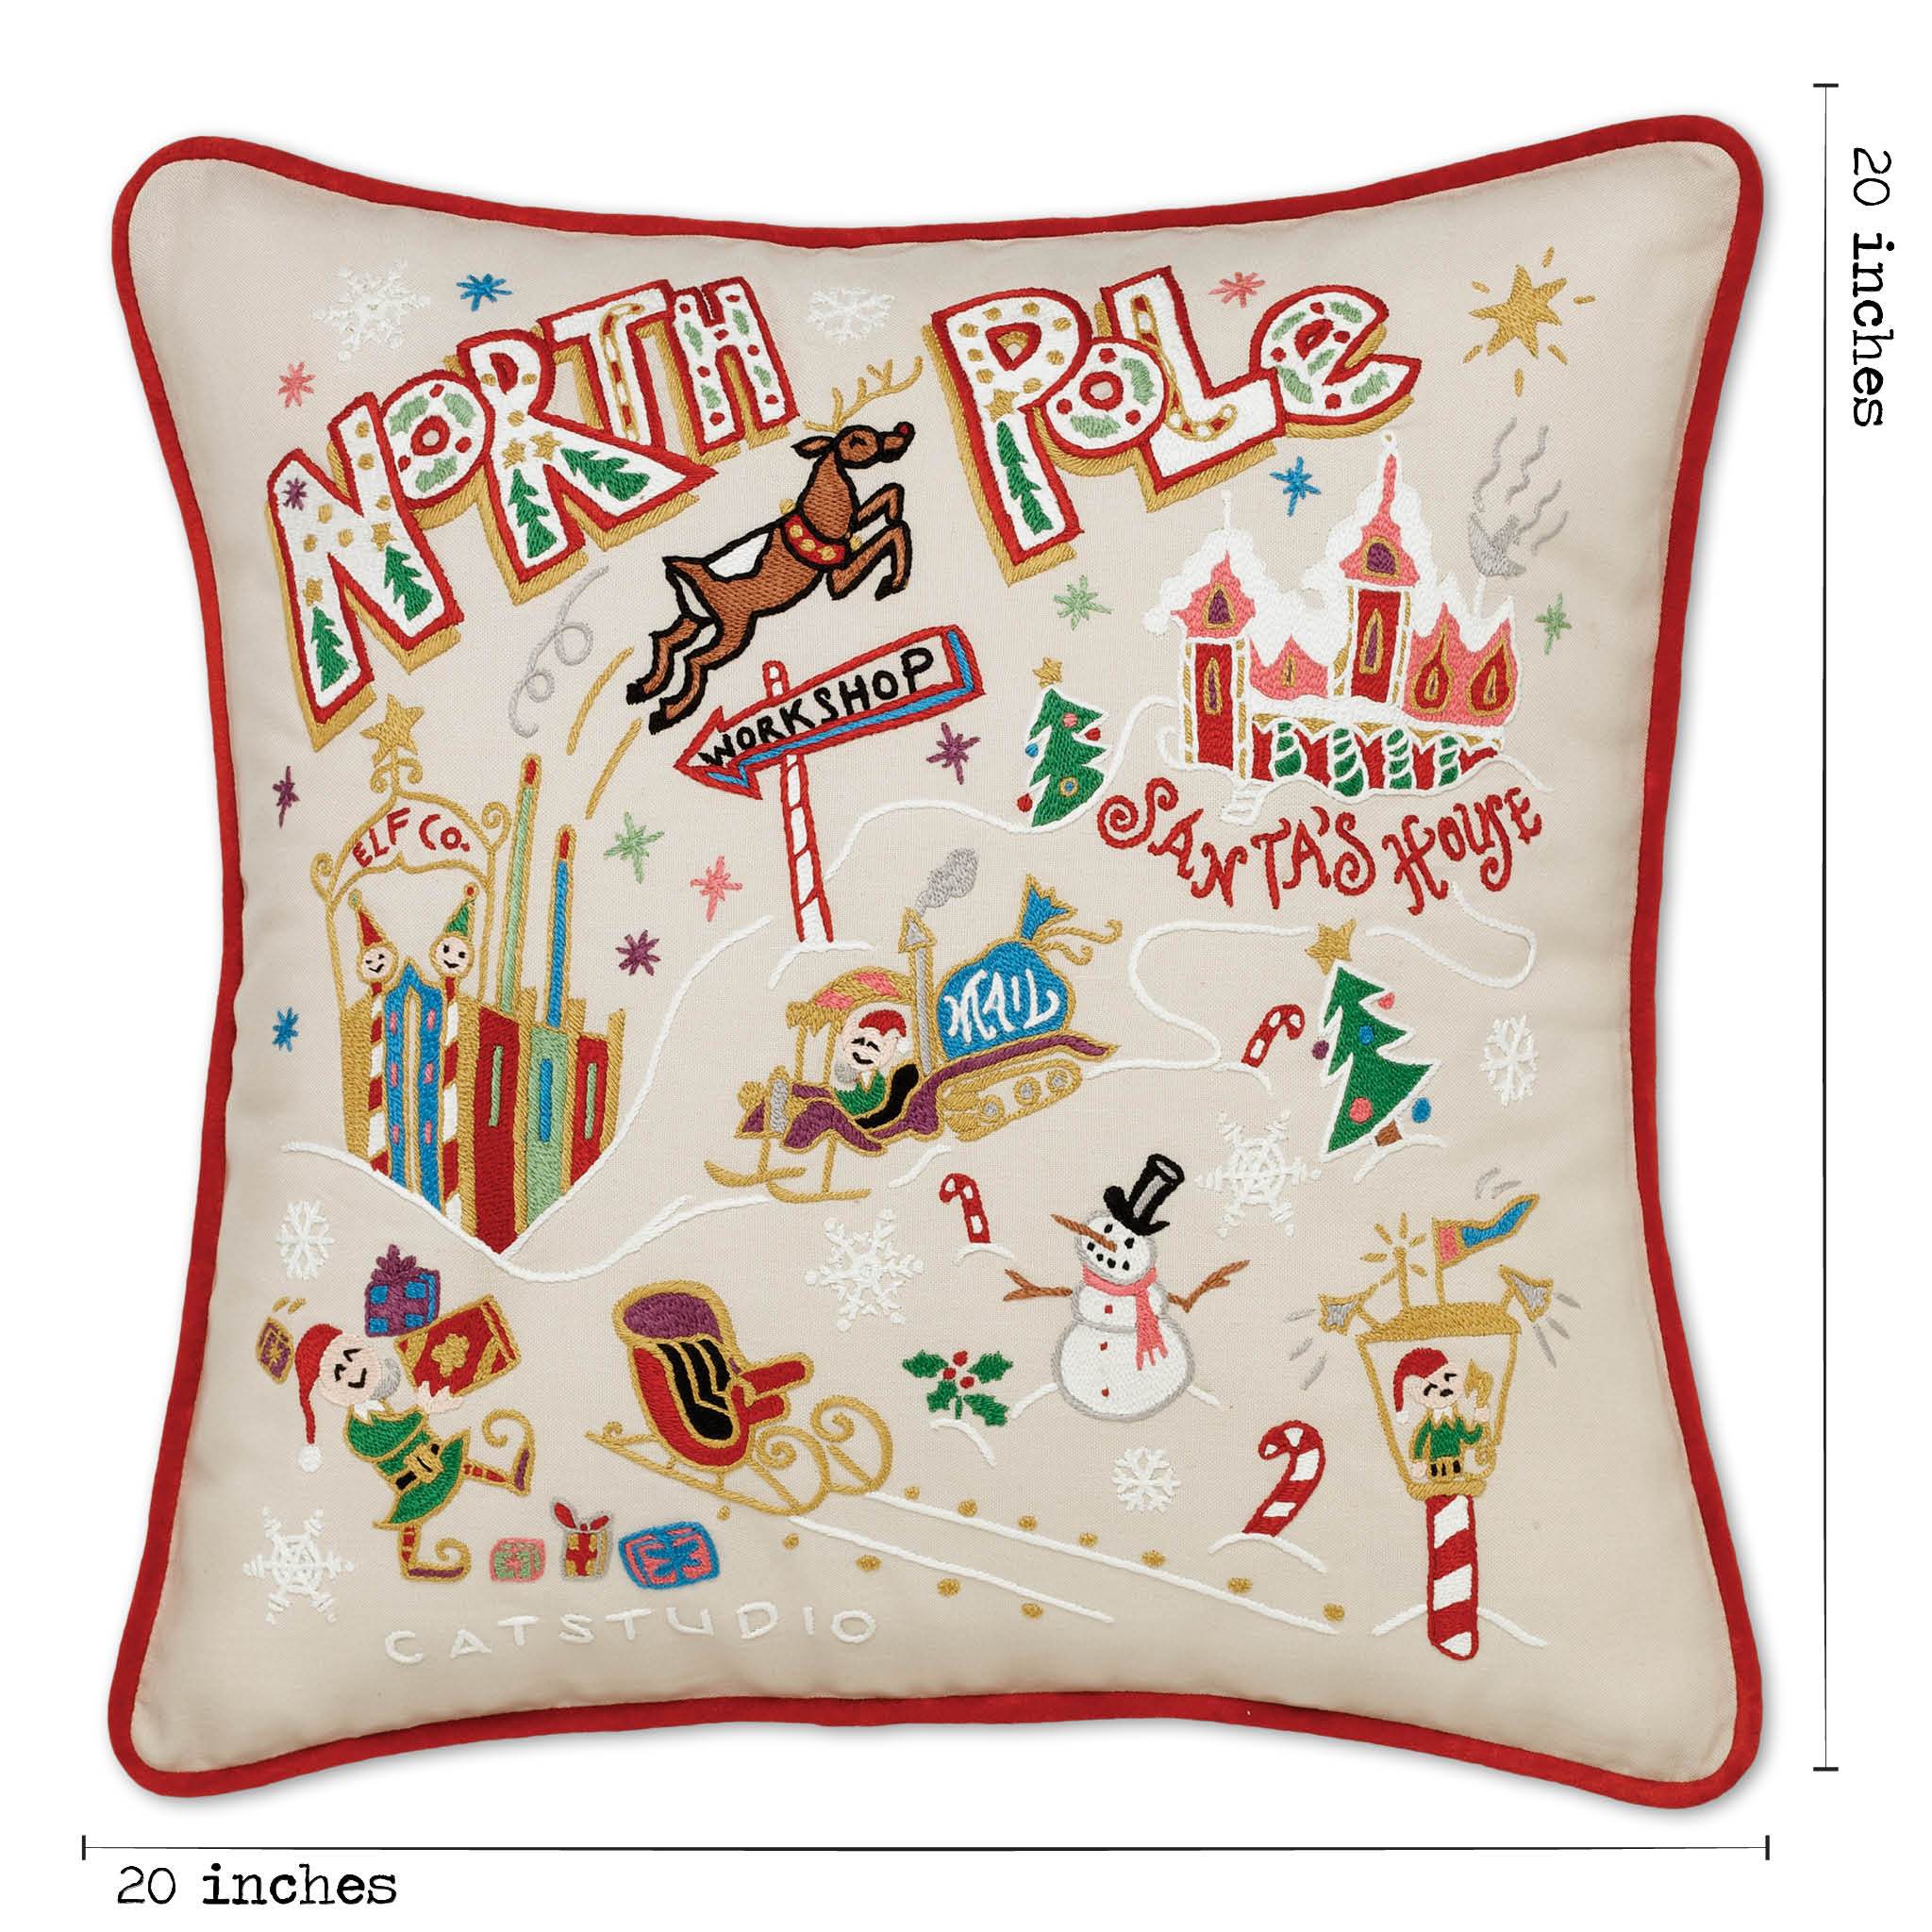 North Pole Trading Co. Merry Christmas Square Throw Pillow